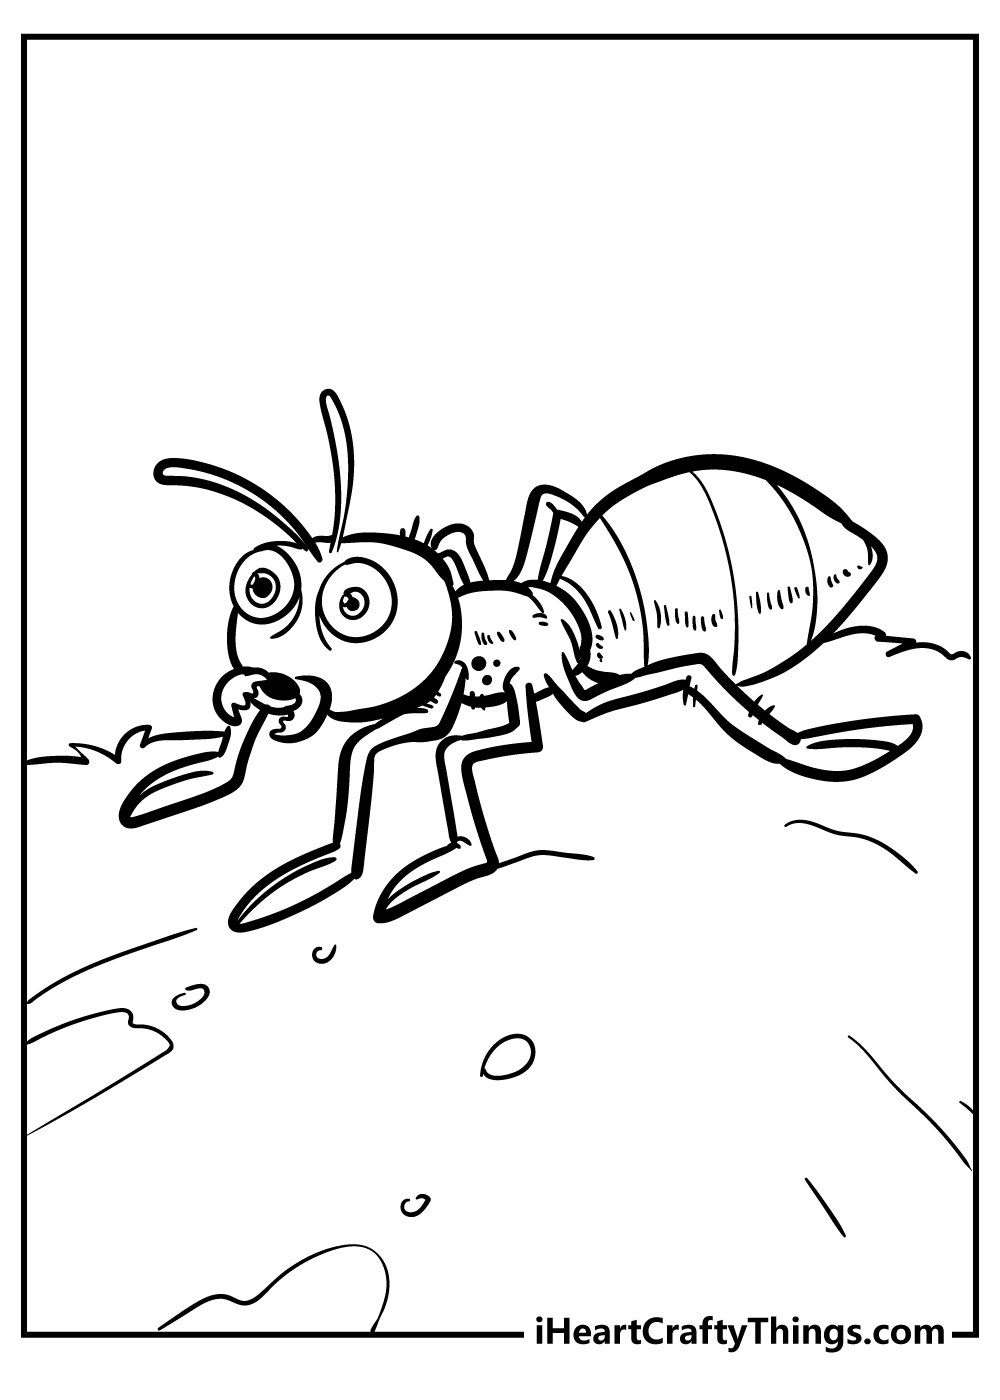 Insect Coloring Pages for kids free download